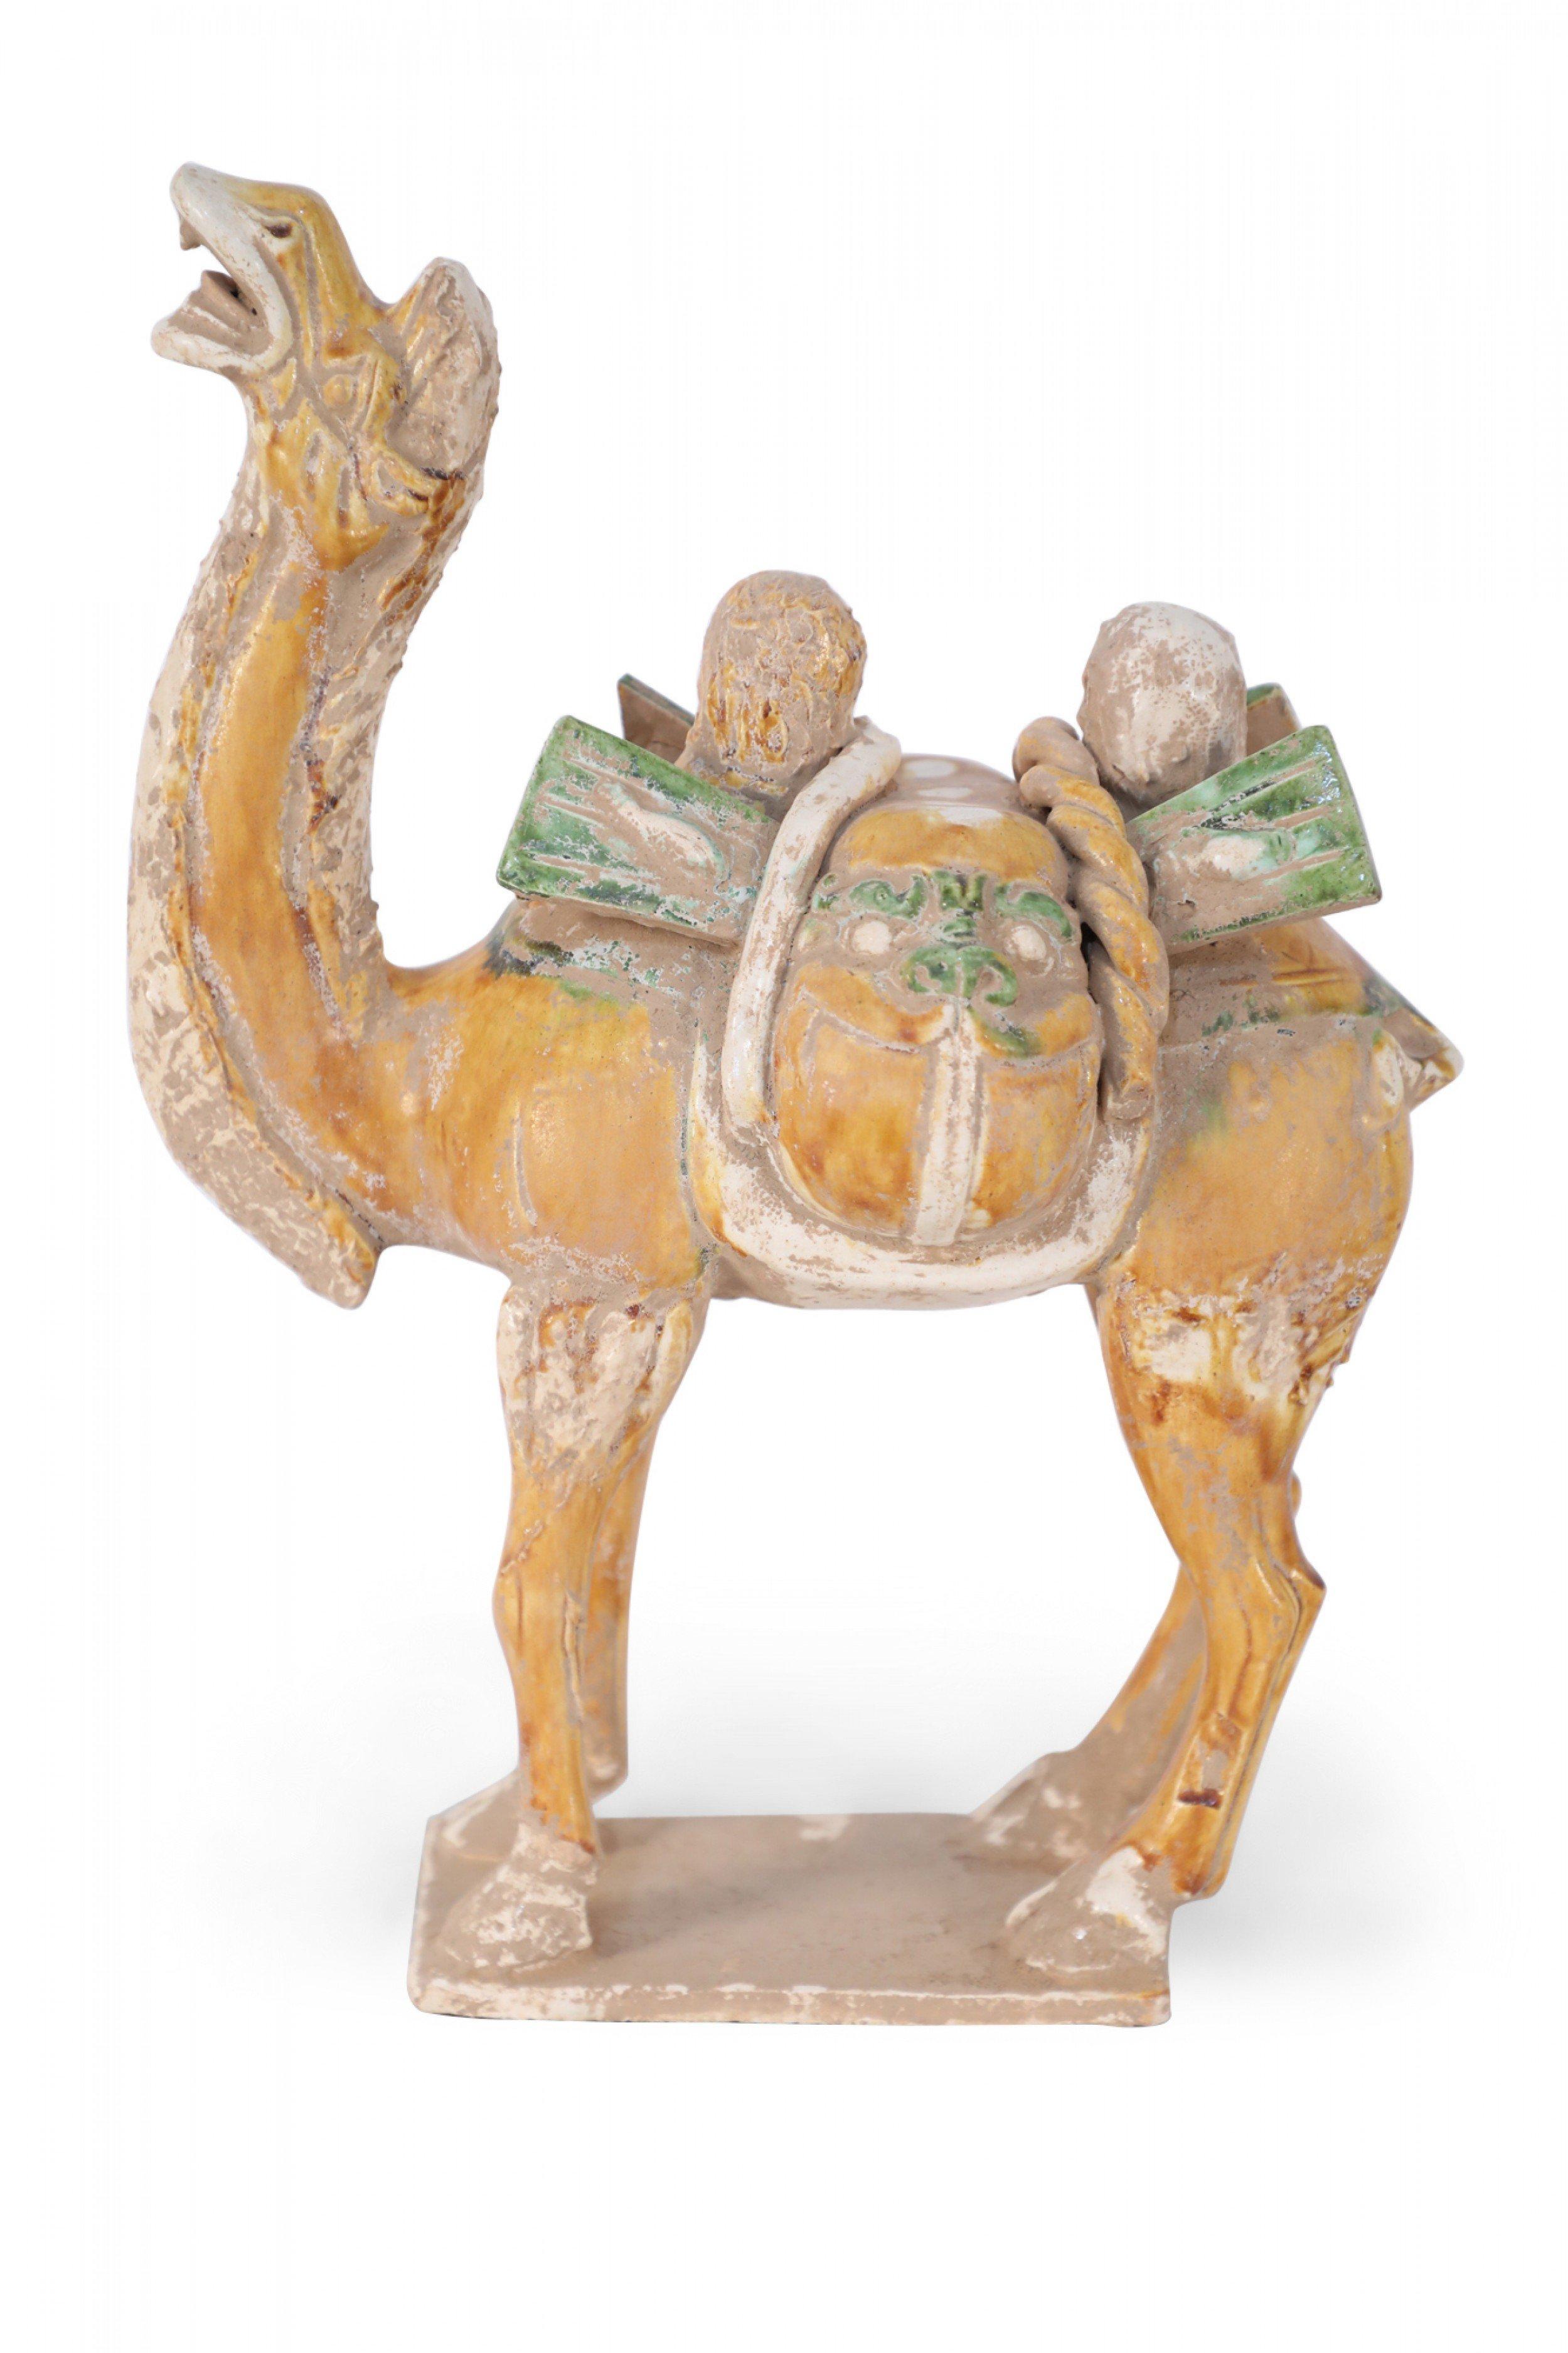 Antique Chinese Tang Dynasty-style terra cotta tomb figure of a Bactrian camel, the main form of transport over the Silk Road, with its head tilted back and mouth open to the sky, wearing a saddle that shows a 